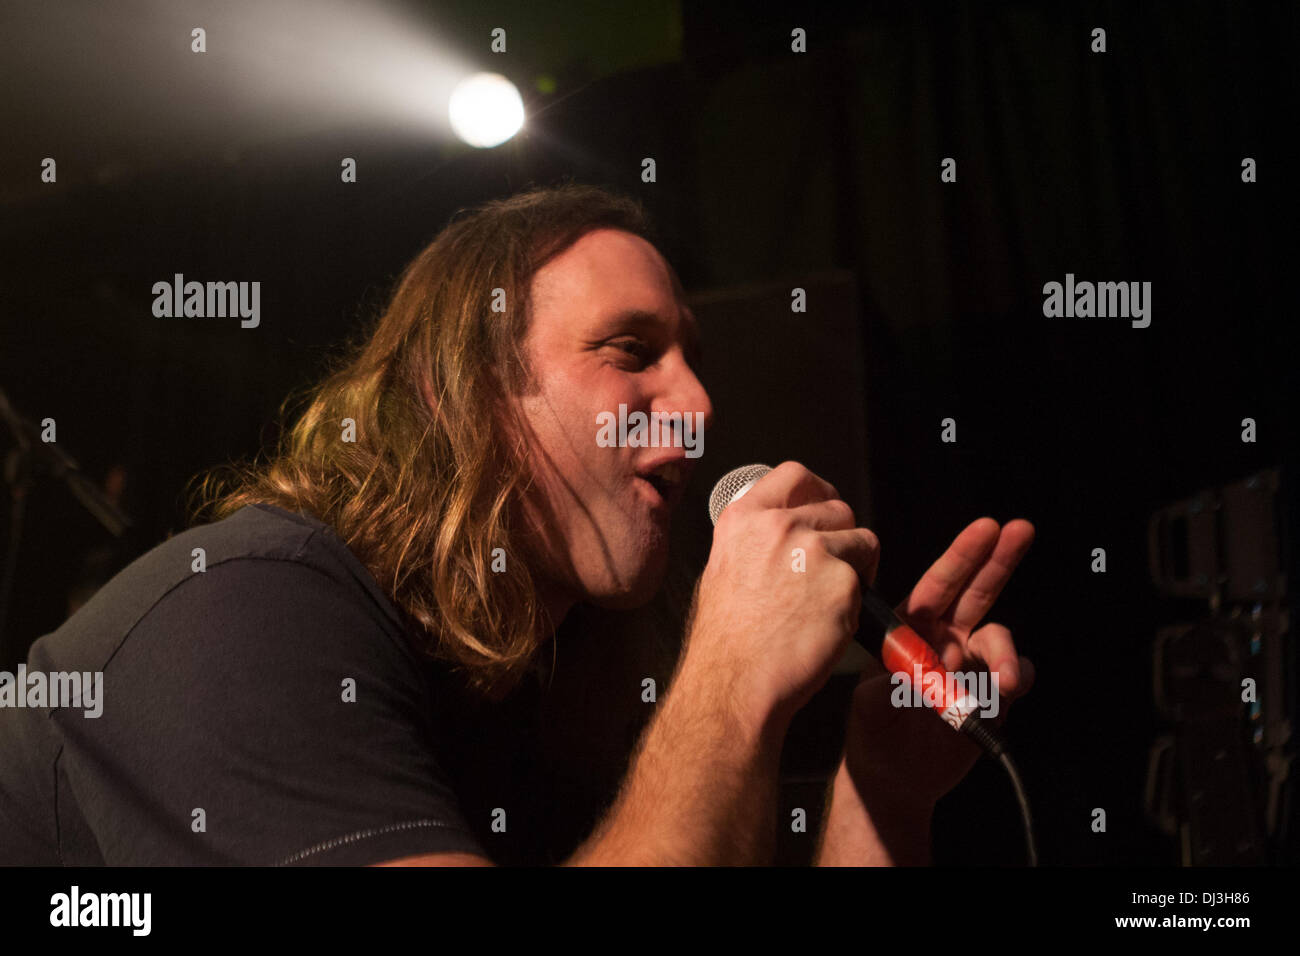 London, UK. 20th November 2013. Gary Stringer, Reef vocalist, performing at one-off KOKO show as part of their 20th Anniversary Tour. London, UK 20th November 2013. Credit:  martyn wheatley/Alamy Live News Stock Photo